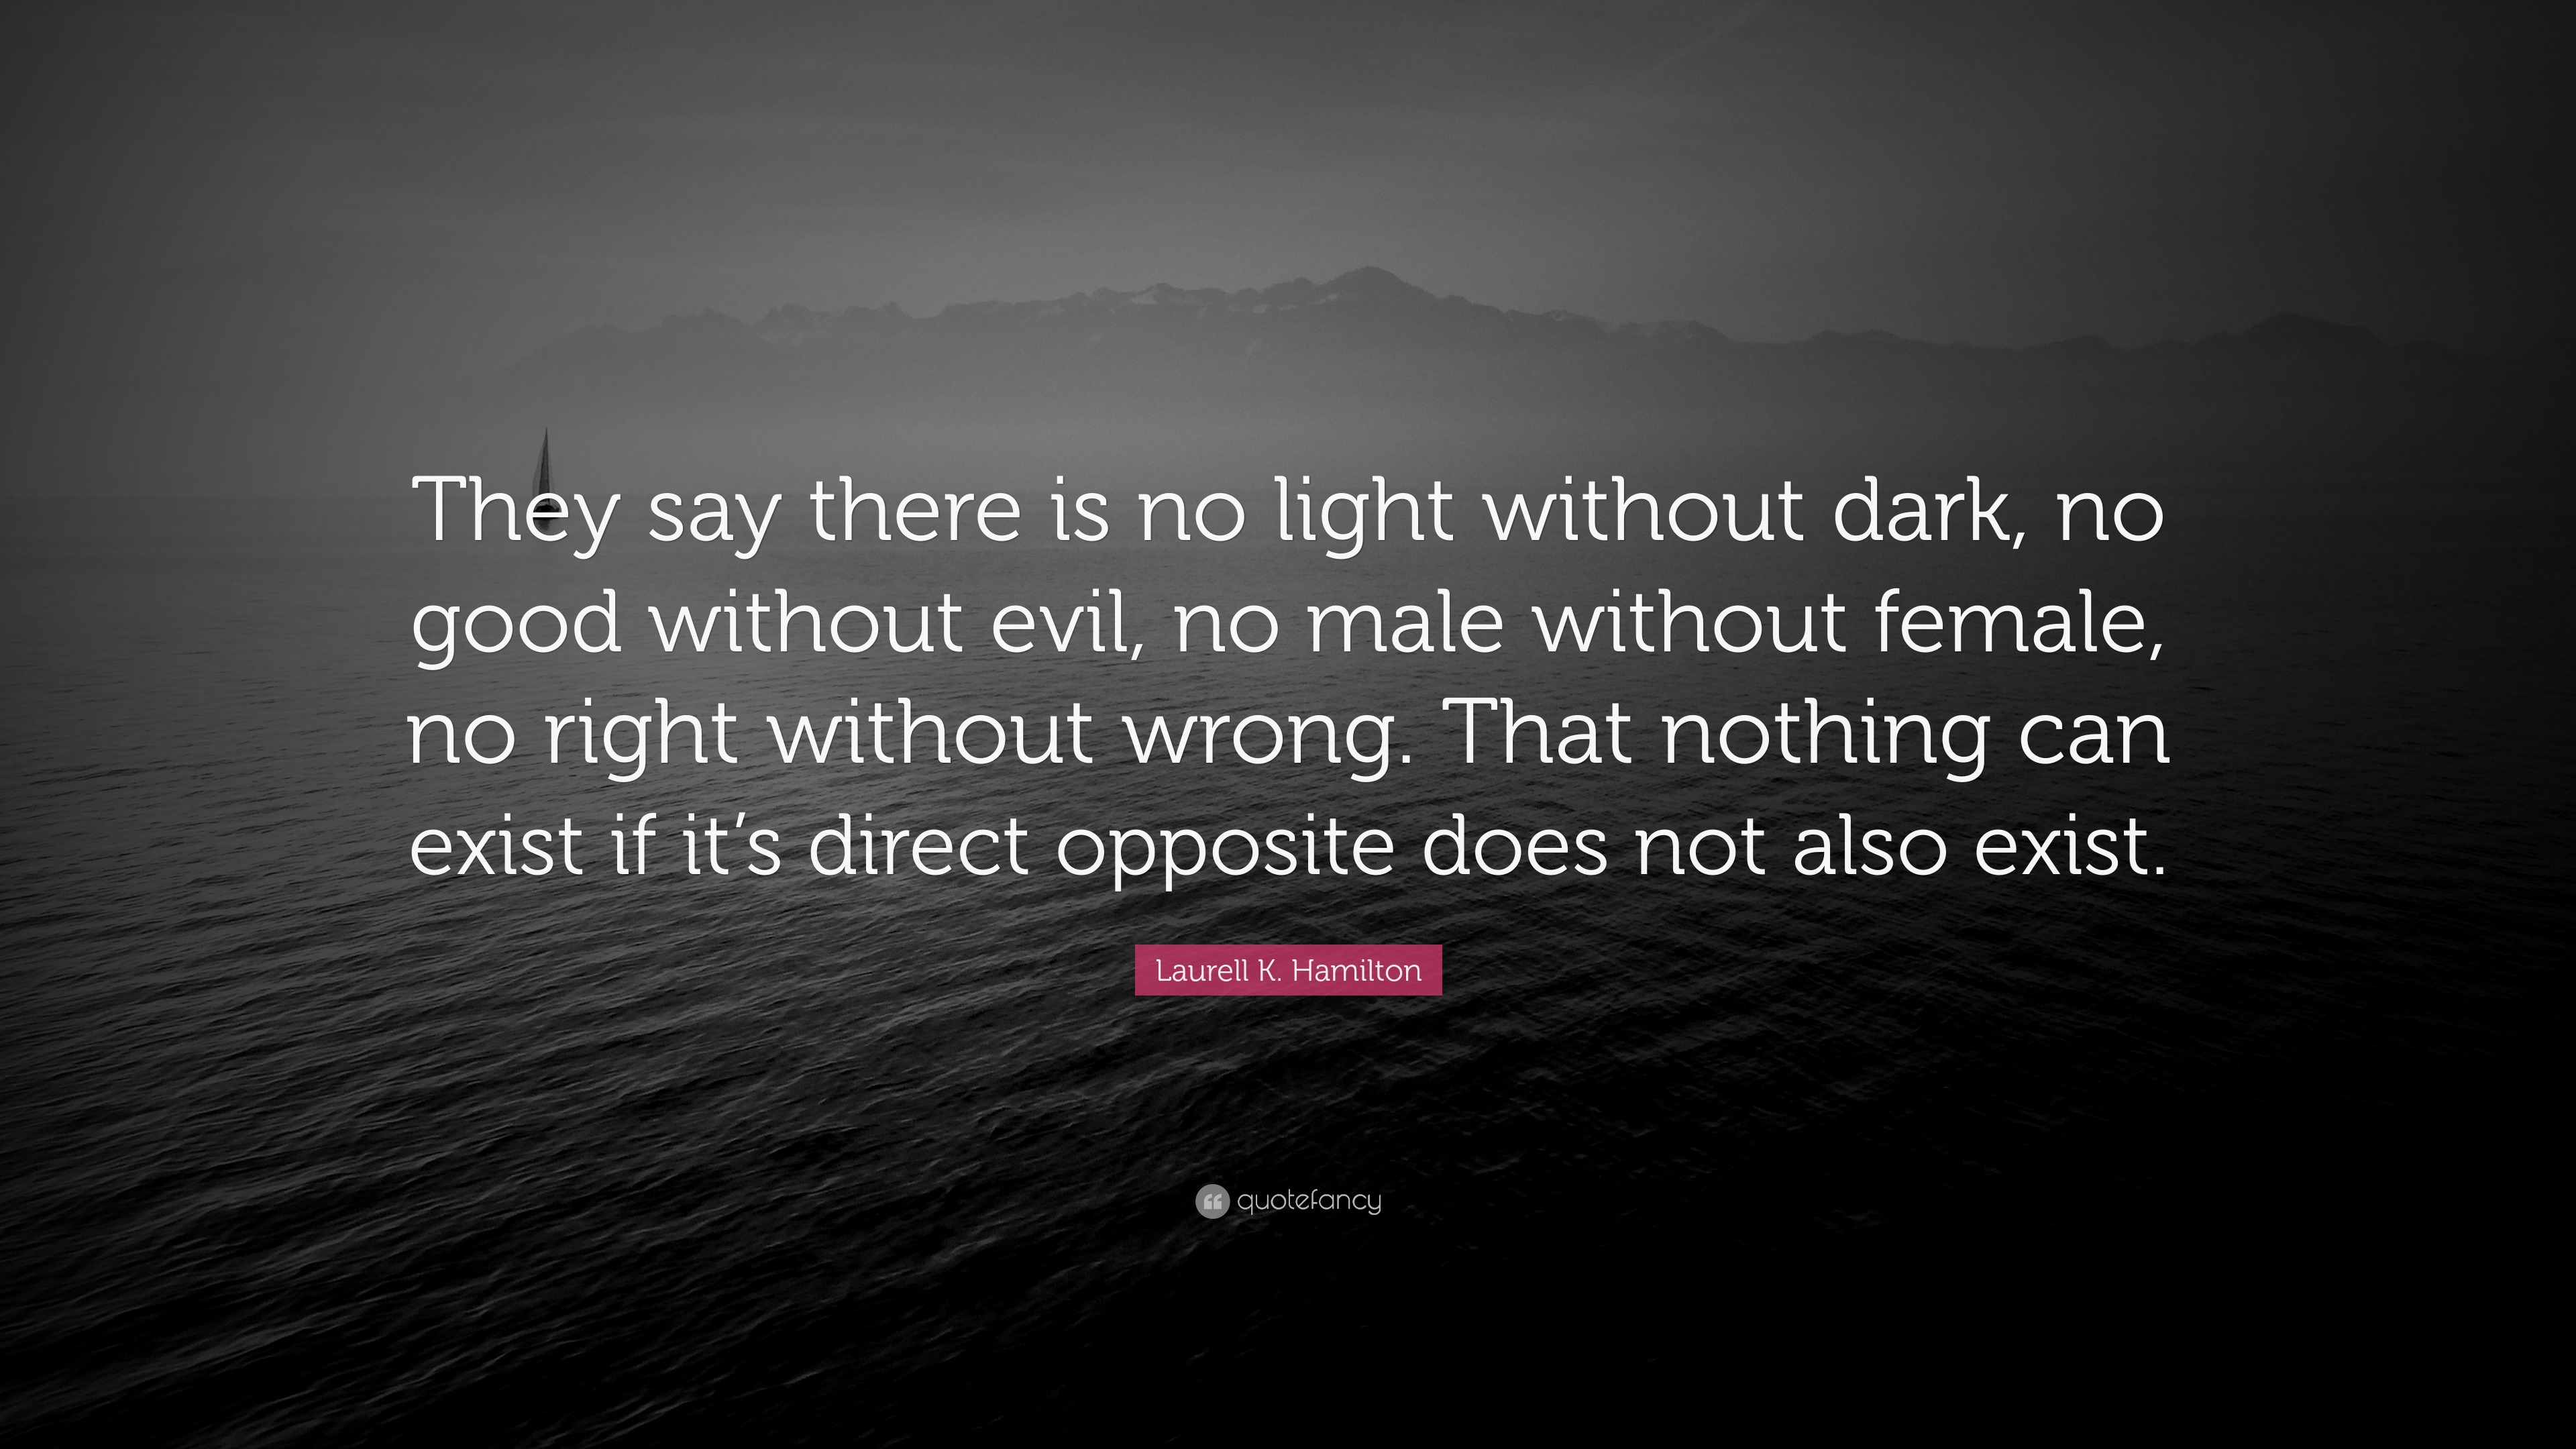 Laurell K Hamilton Quote “they Say There Is No Light Without Dark No Good Without Evil No